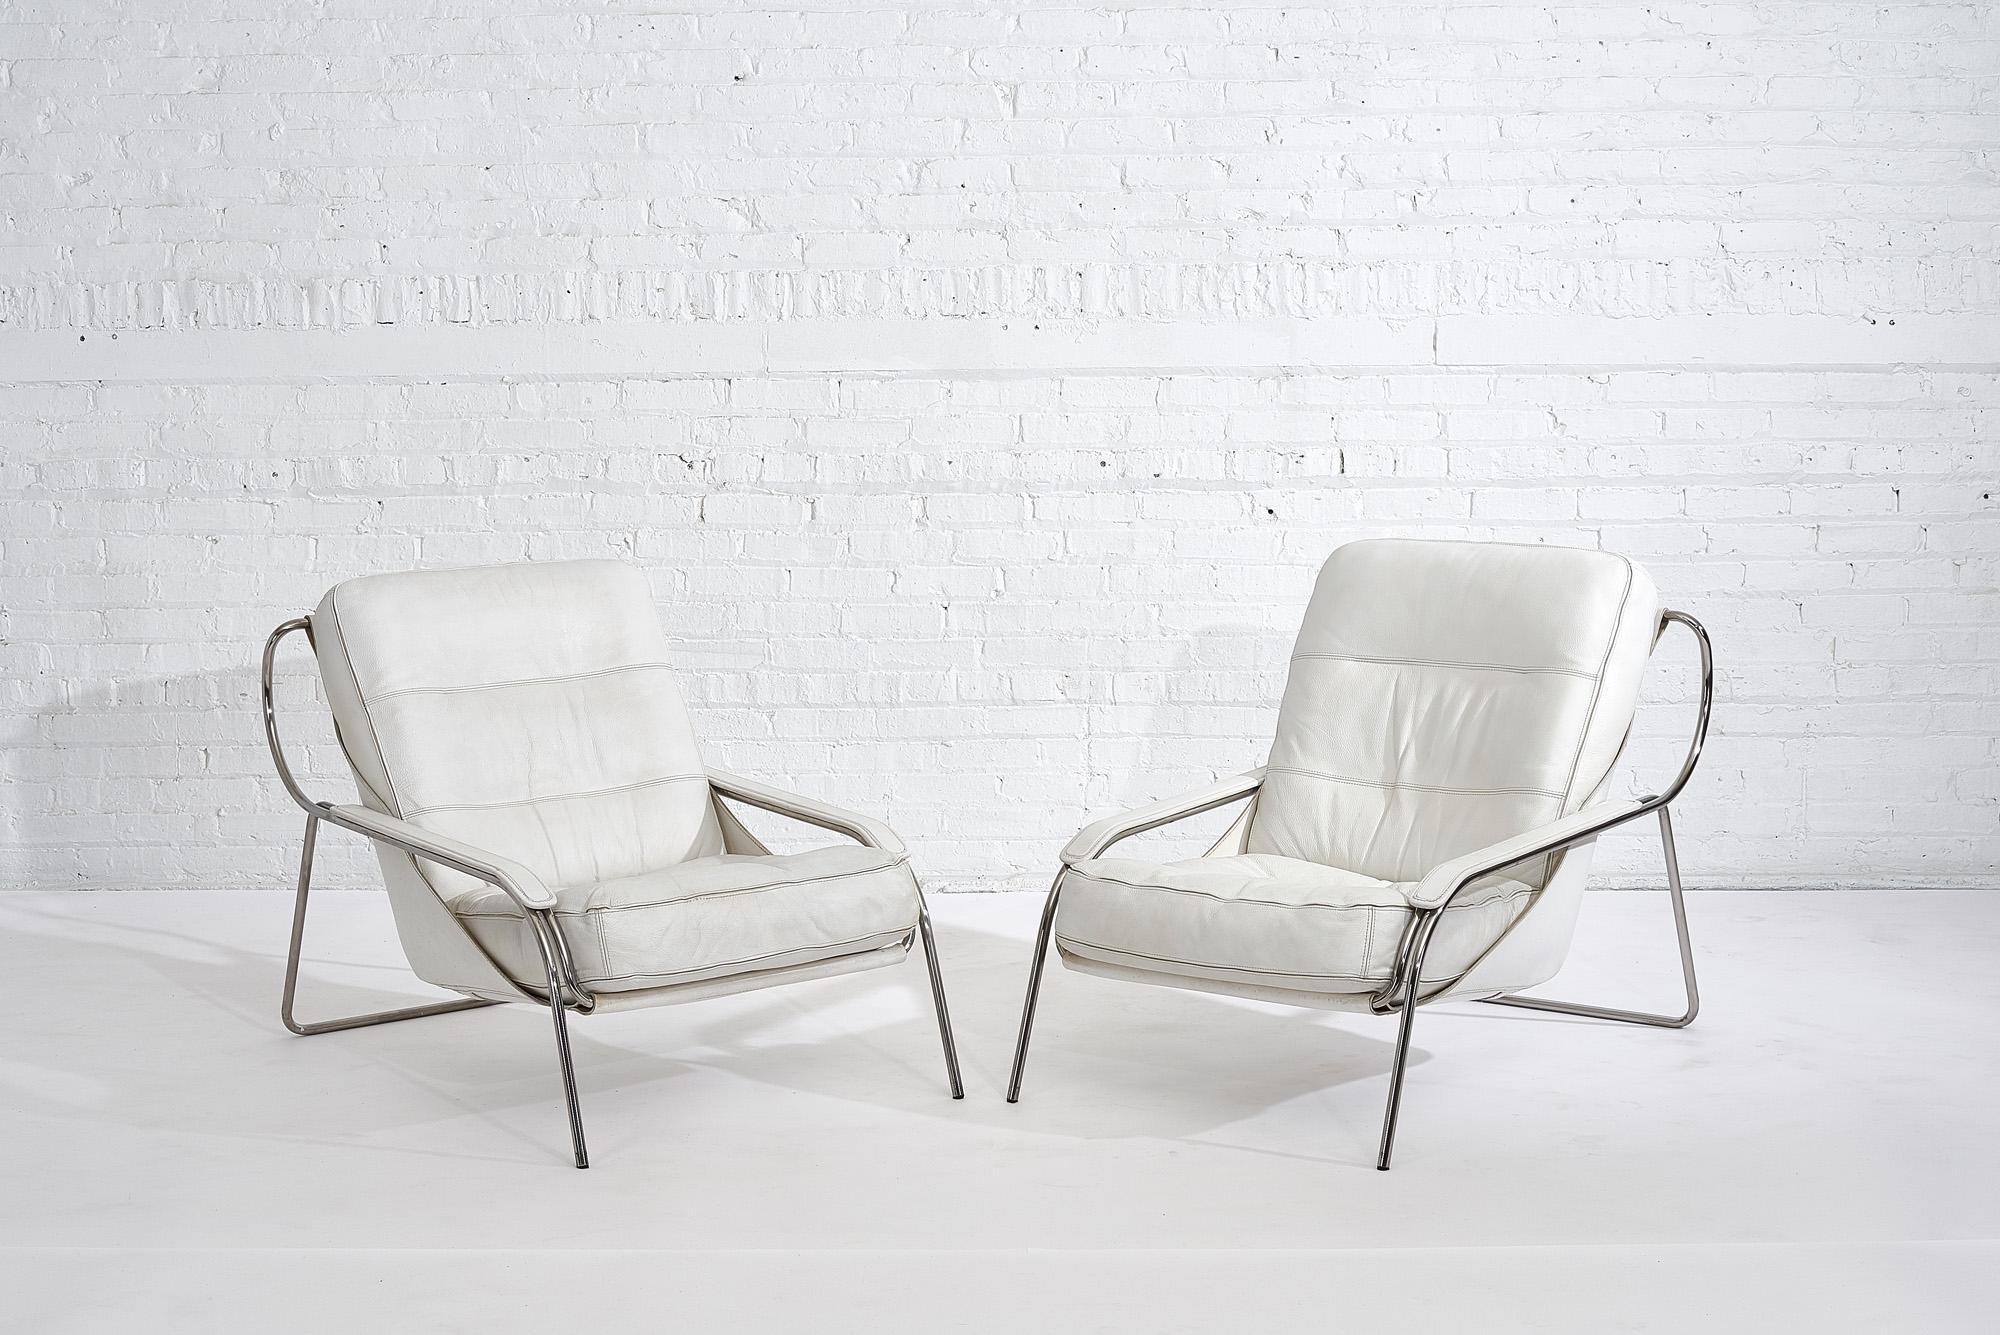 Pair of Maggiolina lounge chairs designed by Marzo Zanuso and manufactured by Zanotta, Italy, 1970. These chairs were originally designed in 1949 and taken into production in the 1970s by Zanotta. These chairs have a chrome plated tubular metal